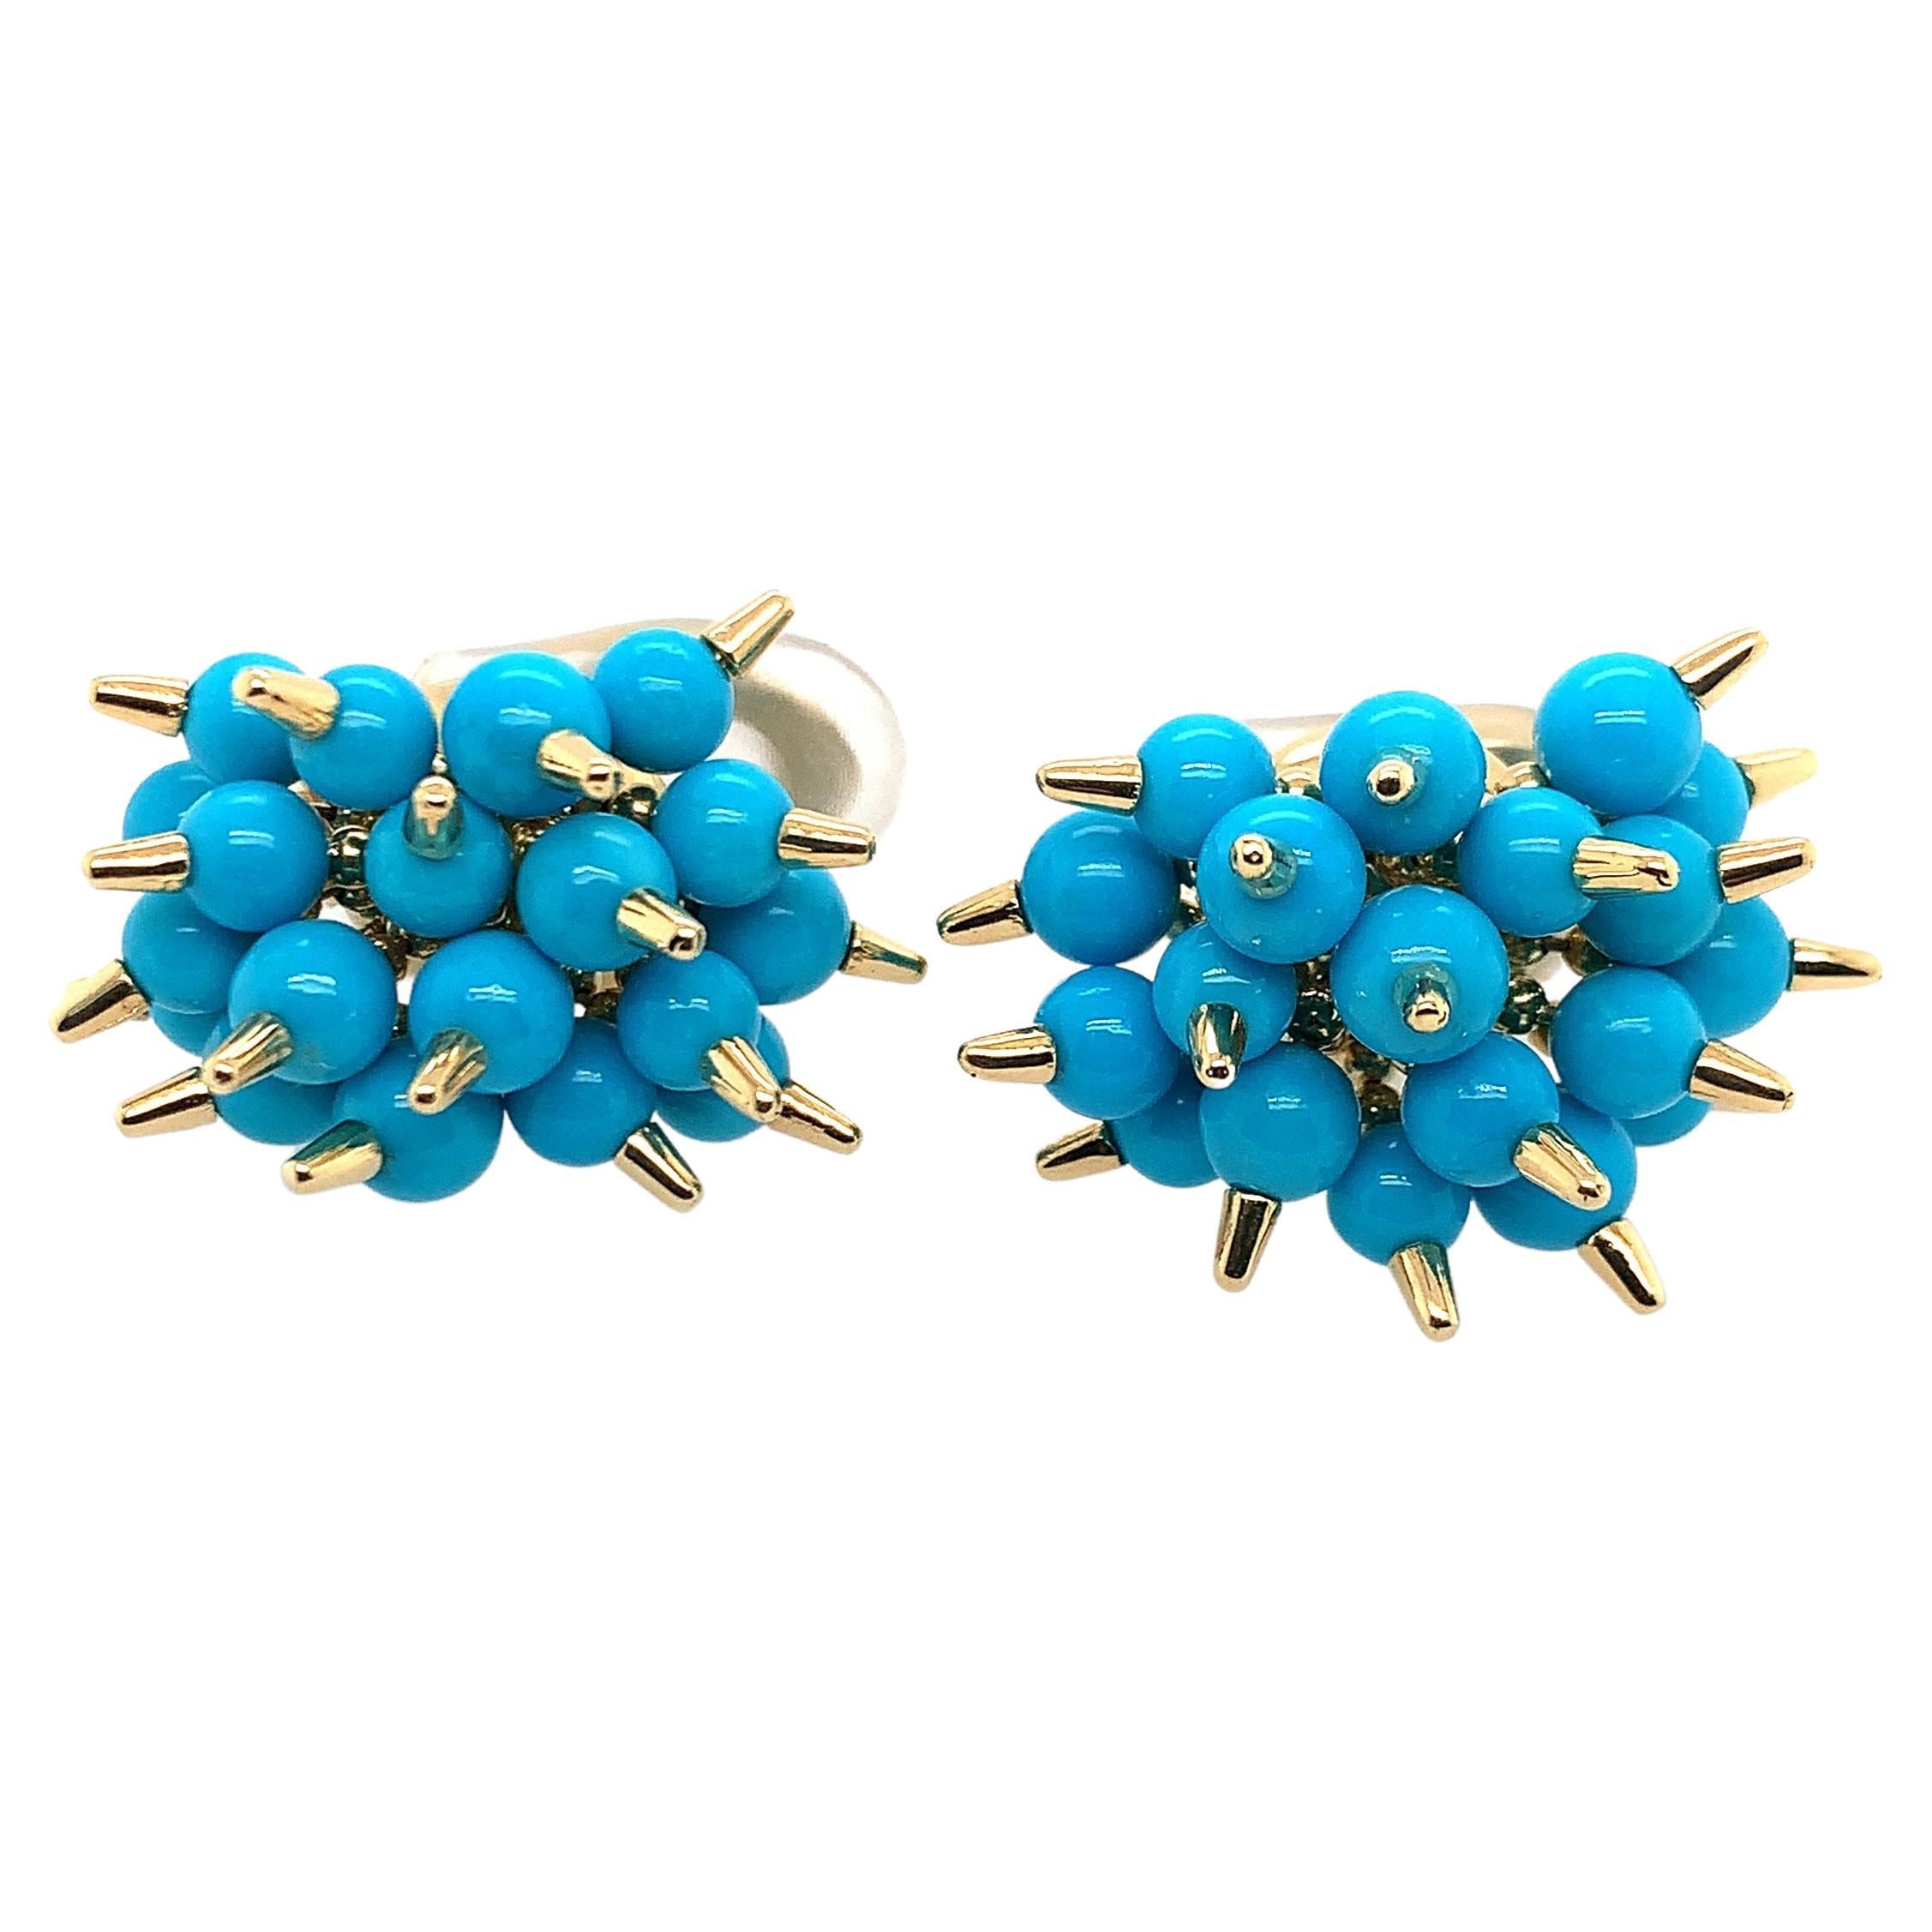 A Pair of Turquoise and Gold Ear Clips, Aletto Bros. For Sale